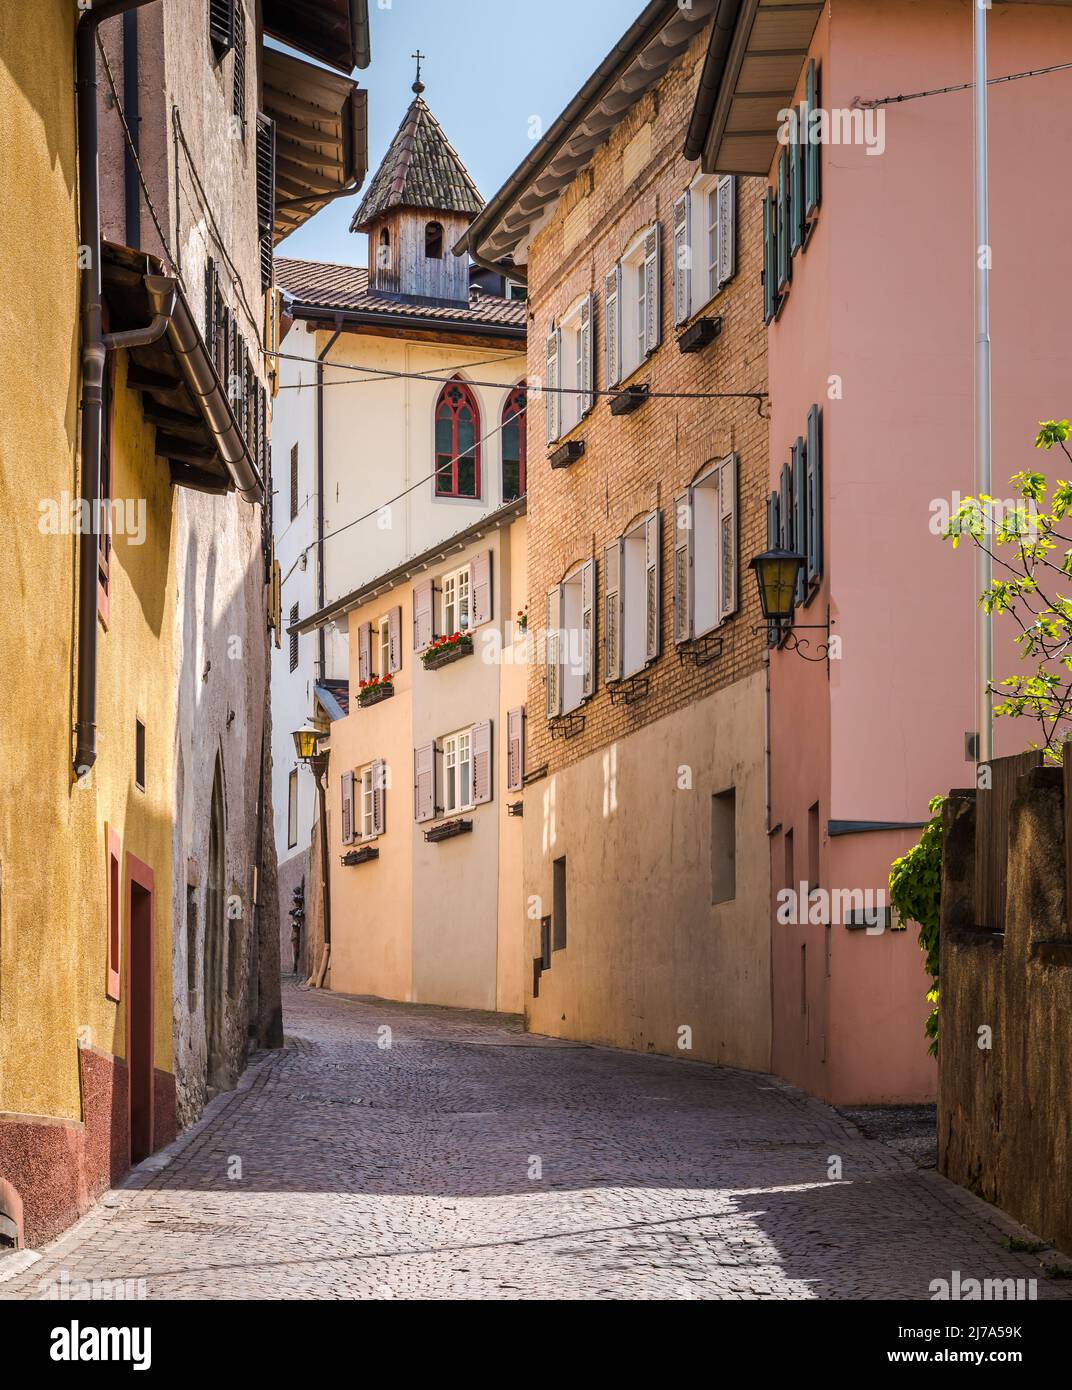 Tramin Village  along the wine rote. Tramin is the wine-growing village of the South Tyrol  - northern Italy - and its history is strongly connected w Stock Photo